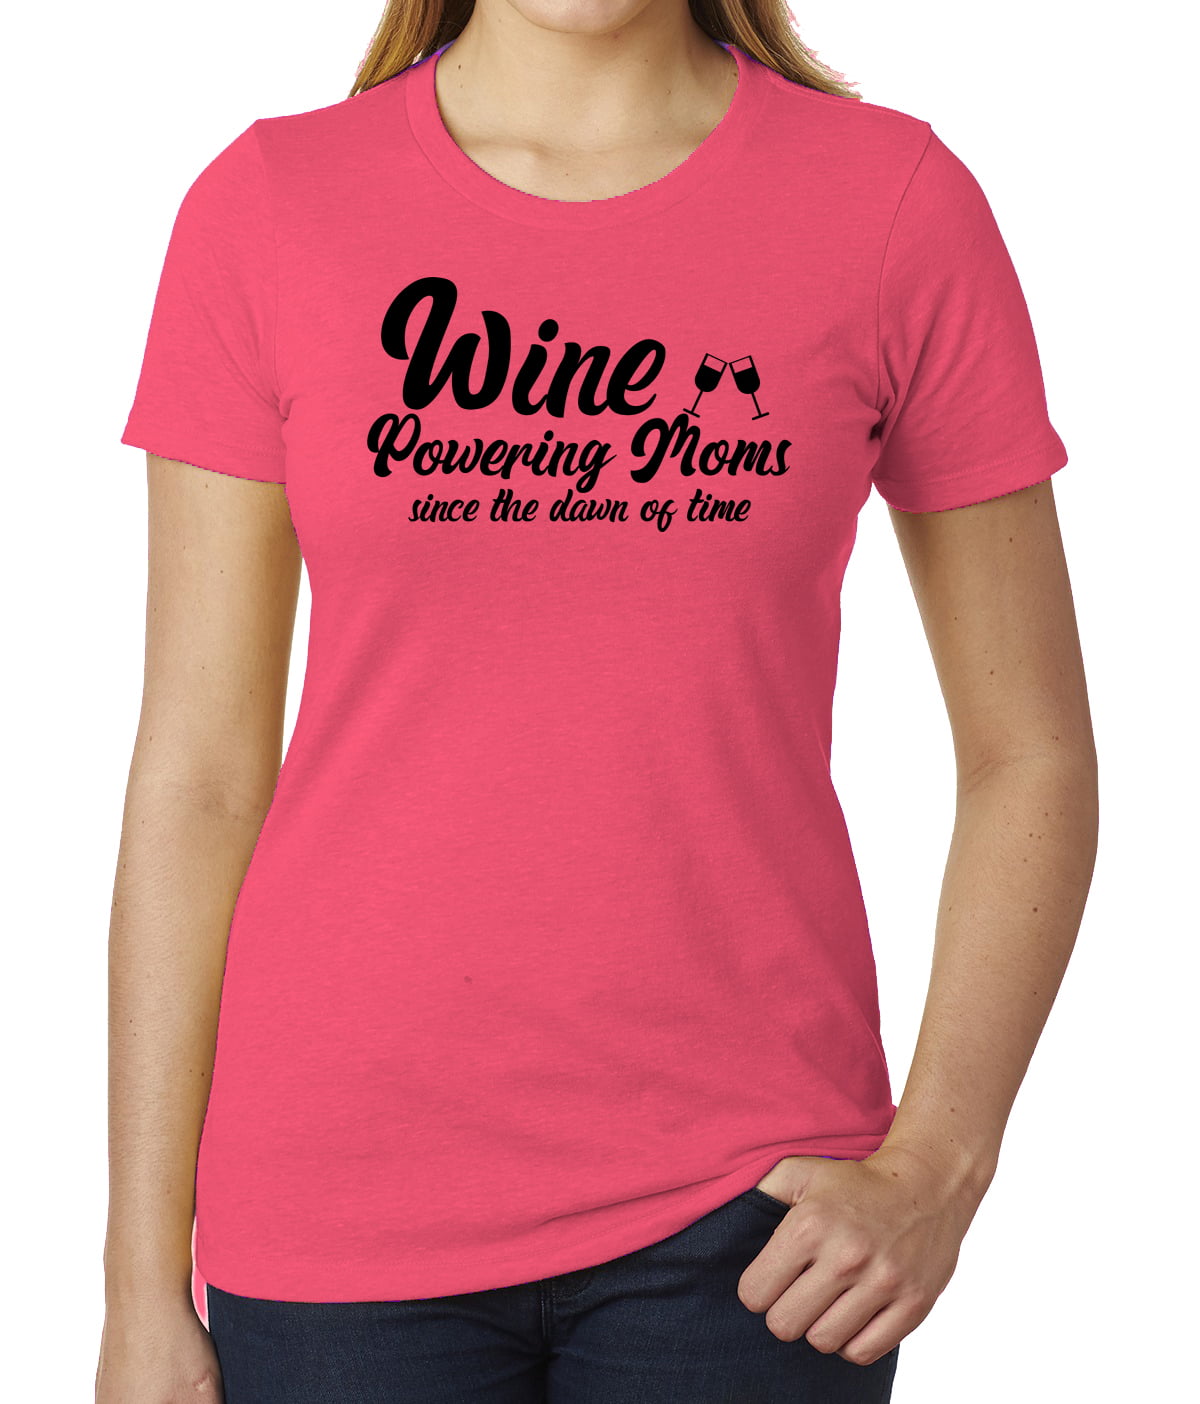 Wine Powering Moms, Funny Mom shirts, Woman's Graphic T-shirts - Heather  Red MH200WMOM S28 2XL 